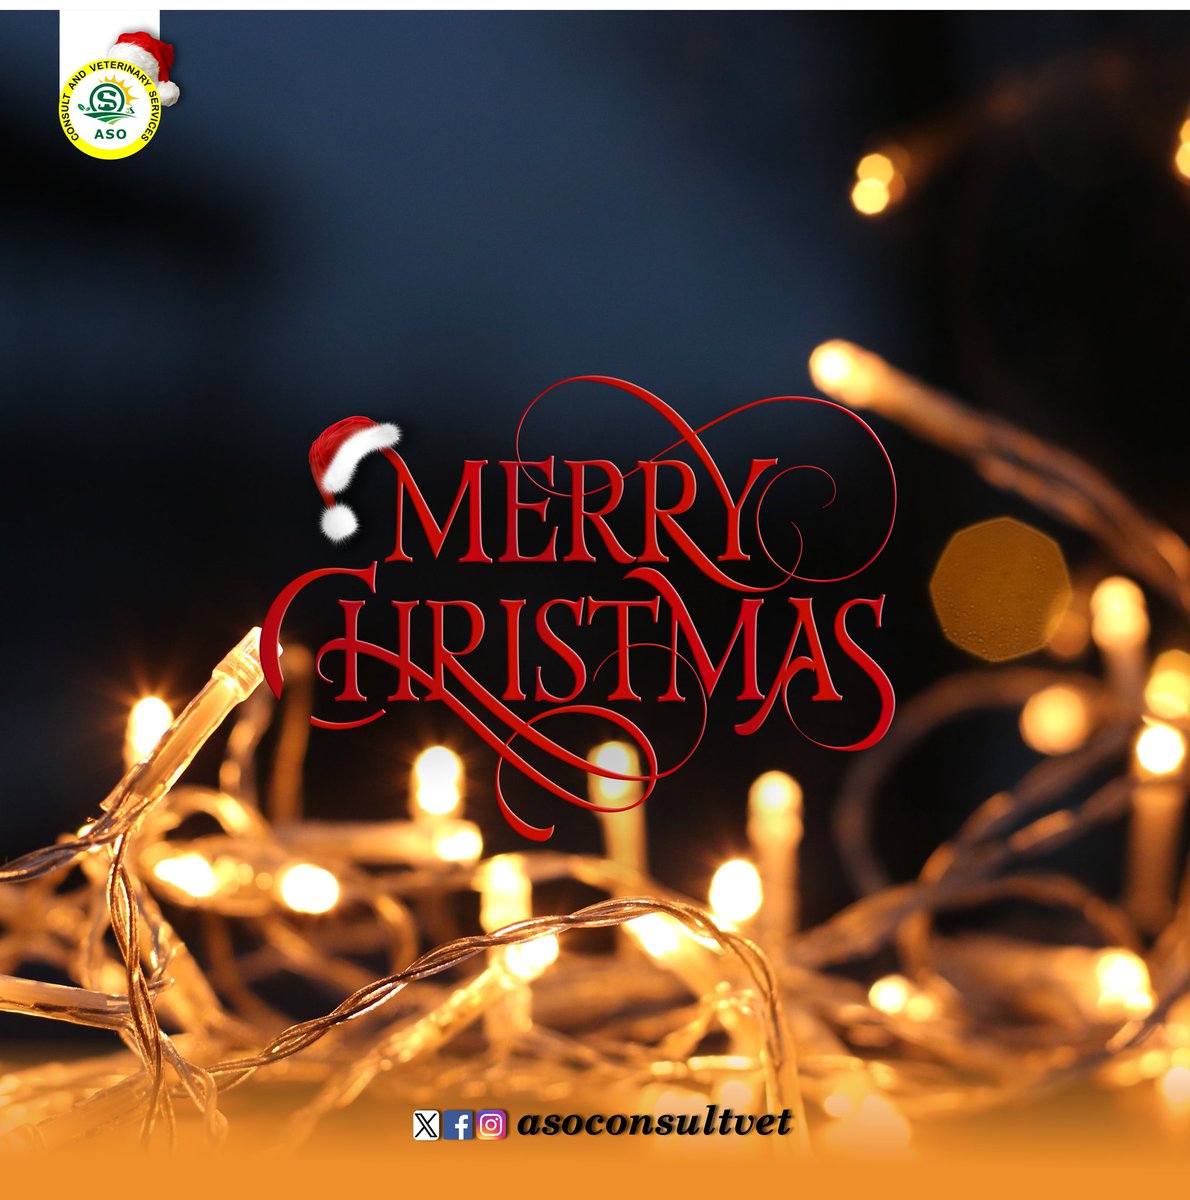 Merry Christmas and a prosperous new year ahead...
#agriculture #asoconsult #MerryChristmas